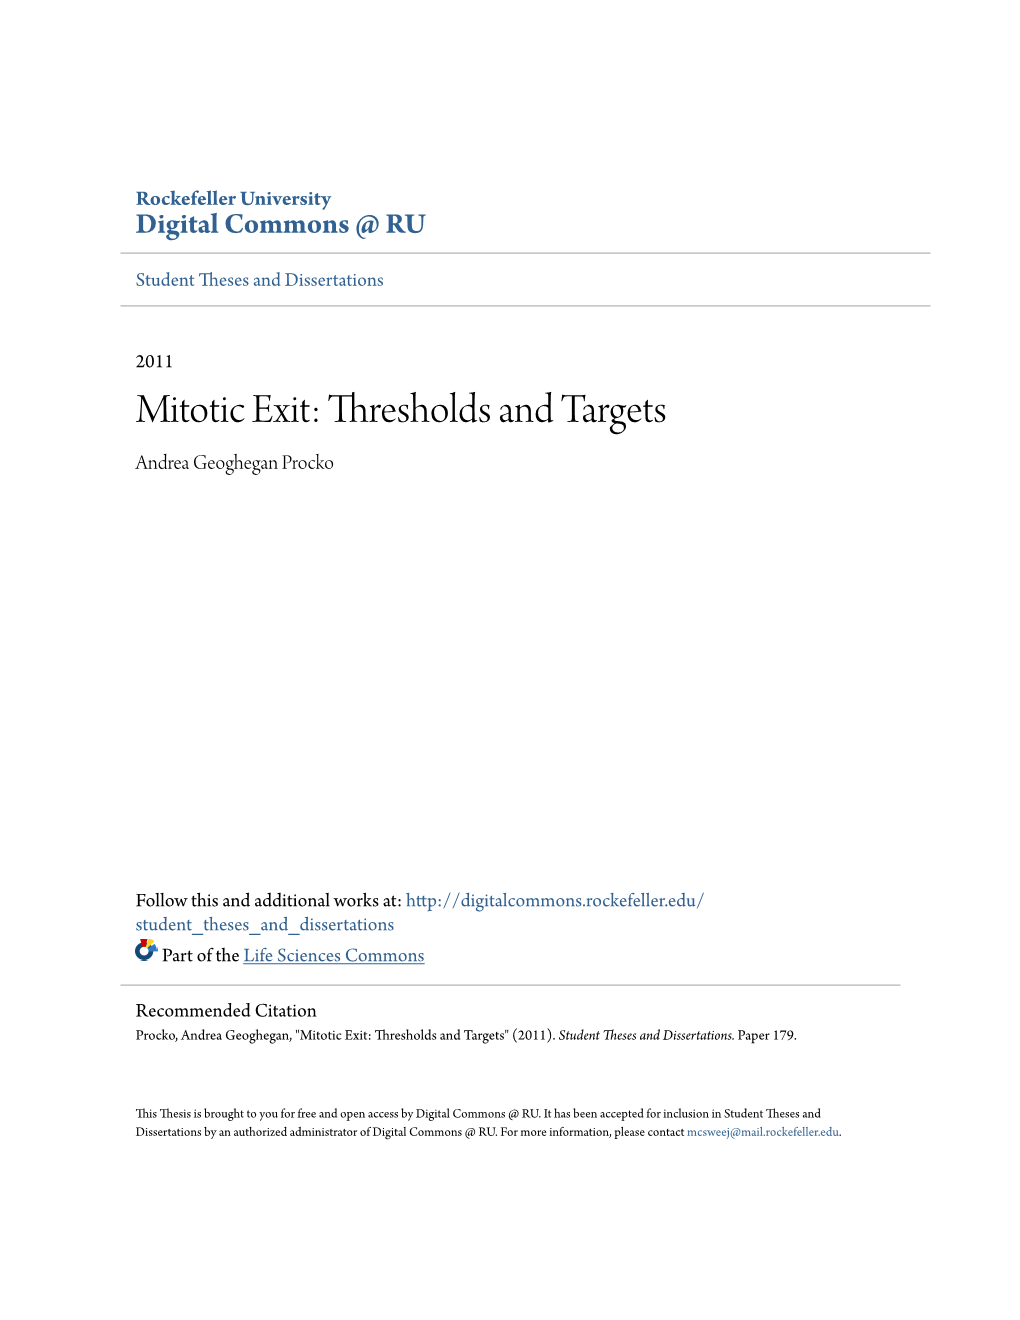 Mitotic Exit: Thresholds and Targets Andrea Geoghegan Procko